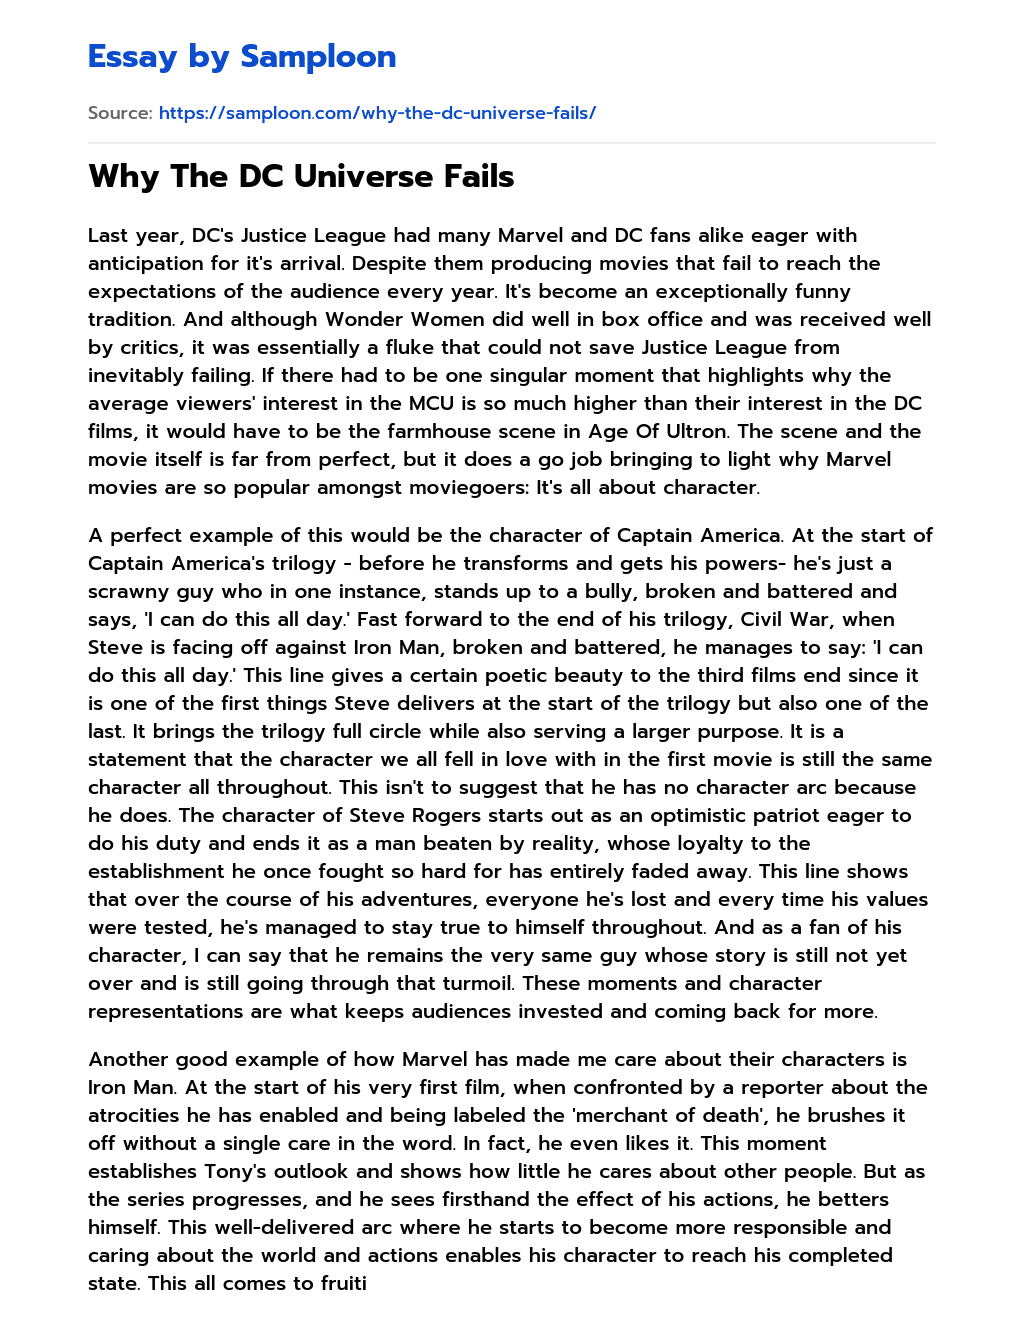 Why The DC Universe Fails essay